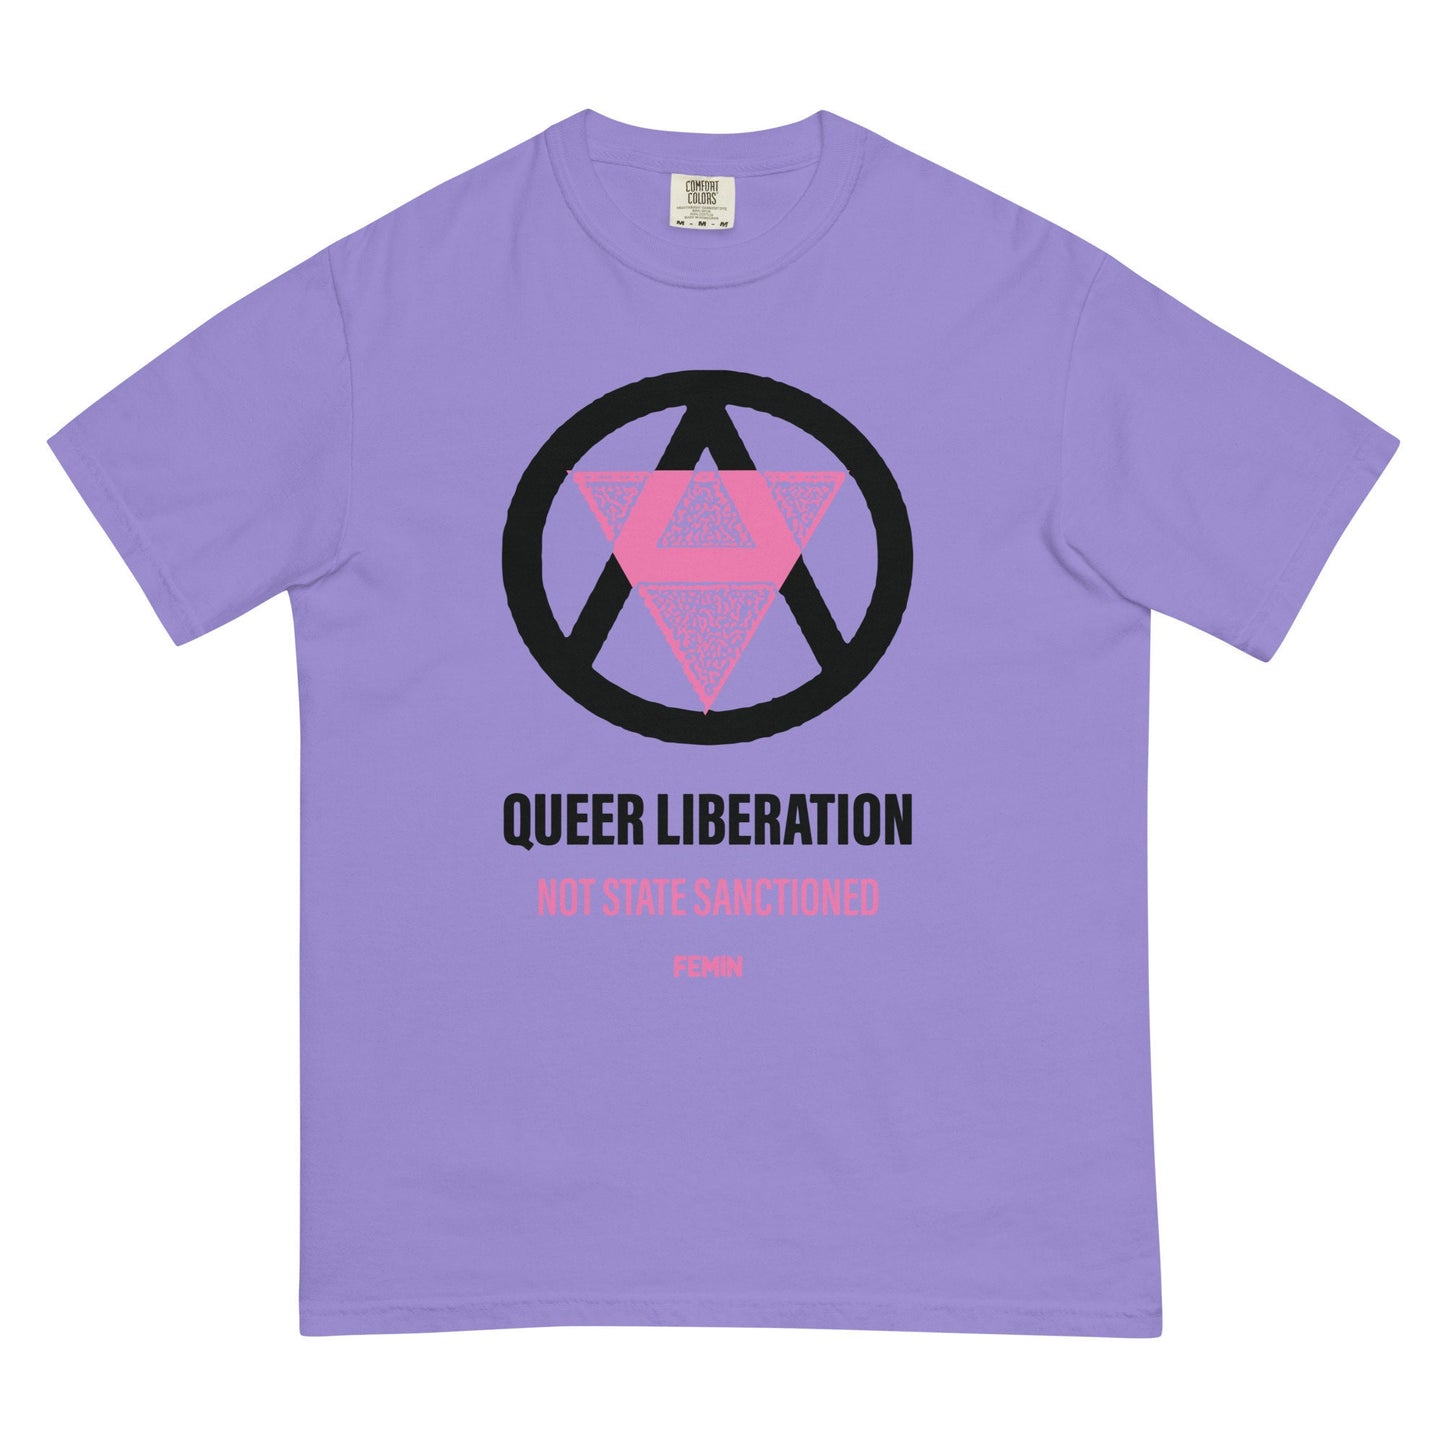 Queer Liberation Not State Sanctioned heavyweight dyed T-shirt